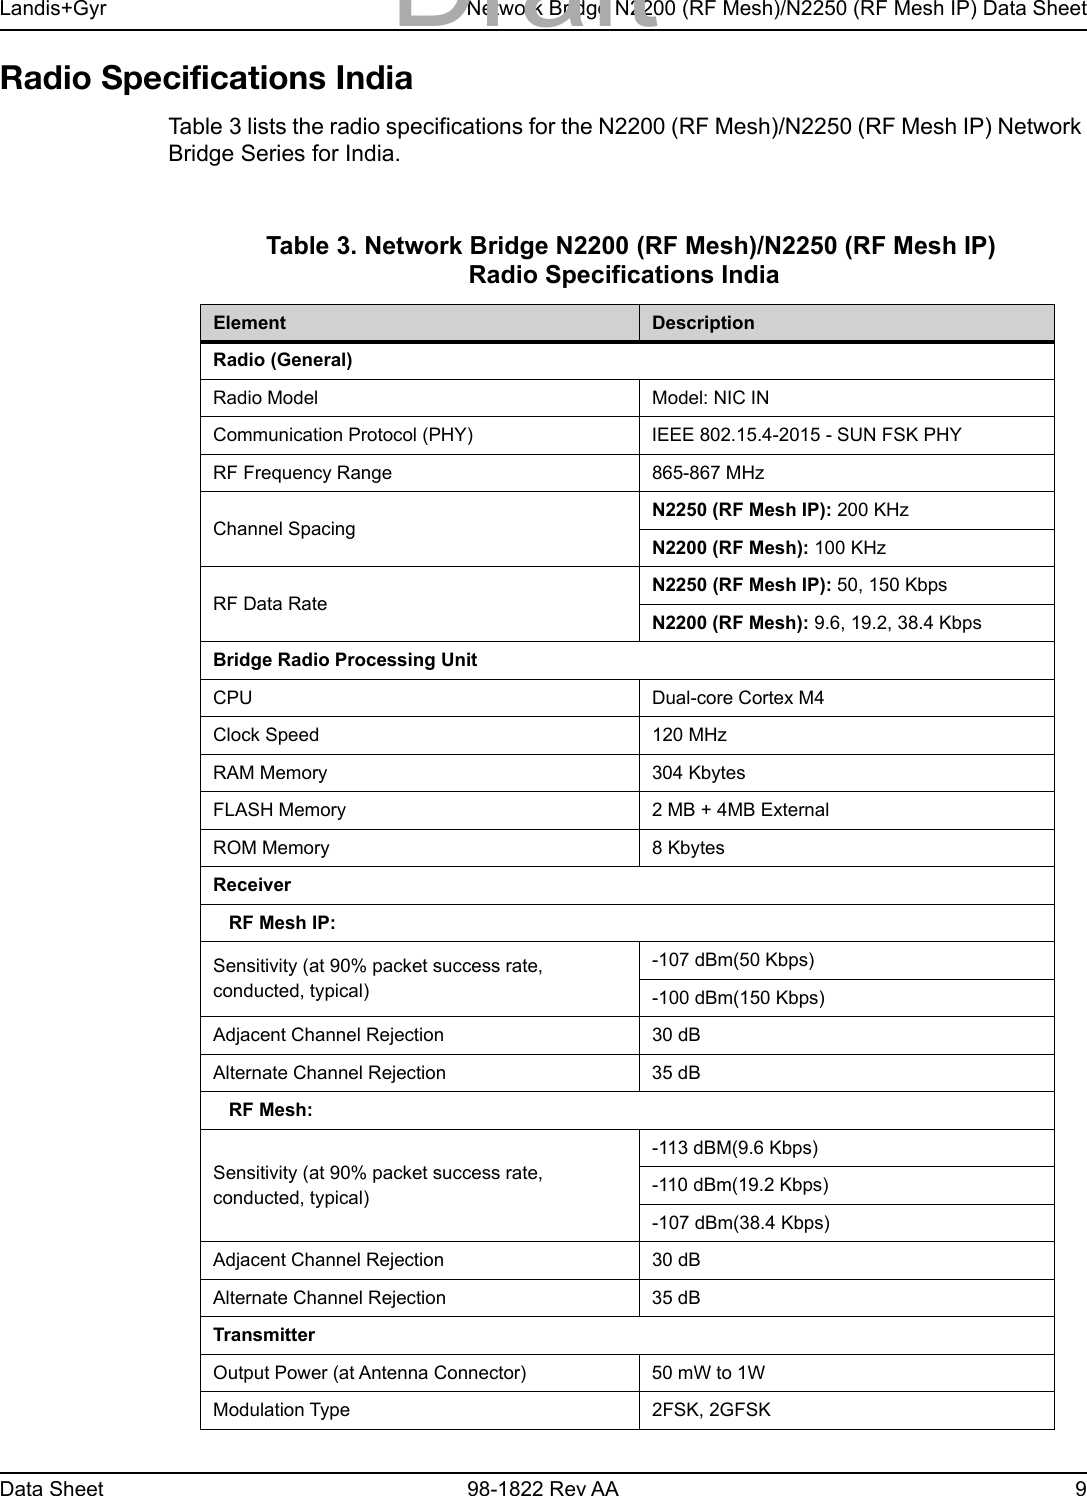 Landis+Gyr Network Bridge N2200 (RF Mesh)/N2250 (RF Mesh IP) Data SheetData Sheet 98-1822 Rev AA 9Radio Specifications IndiaTable 3 lists the radio specifications for the N2200 (RF Mesh)/N2250 (RF Mesh IP) Network Bridge Series for India. Table 3. Network Bridge N2200 (RF Mesh)/N2250 (RF Mesh IP) Radio Specifications IndiaElement DescriptionRadio (General)Radio Model Model: NIC INCommunication Protocol (PHY) IEEE 802.15.4-2015 - SUN FSK PHYRF Frequency Range 865-867 MHzChannel SpacingN2250 (RF Mesh IP): 200 KHzN2200 (RF Mesh): 100 KHzRF Data RateN2250 (RF Mesh IP): 50, 150 KbpsN2200 (RF Mesh): 9.6, 19.2, 38.4 KbpsBridge Radio Processing UnitCPU Dual-core Cortex M4Clock Speed 120 MHzRAM Memory 304 KbytesFLASH Memory 2 MB + 4MB ExternalROM Memory 8 KbytesReceiver   RF Mesh IP:Sensitivity (at 90% packet success rate, conducted, typical) -107 dBm(50 Kbps)-100 dBm(150 Kbps)Adjacent Channel Rejection 30 dBAlternate Channel Rejection 35 dB   RF Mesh:Sensitivity (at 90% packet success rate, conducted, typical) -113 dBM(9.6 Kbps)-110 dBm(19.2 Kbps)-107 dBm(38.4 Kbps)Adjacent Channel Rejection 30 dBAlternate Channel Rejection 35 dBTransmitterOutput Power (at Antenna Connector) 50 mW to 1WModulation Type 2FSK, 2GFSKDraft